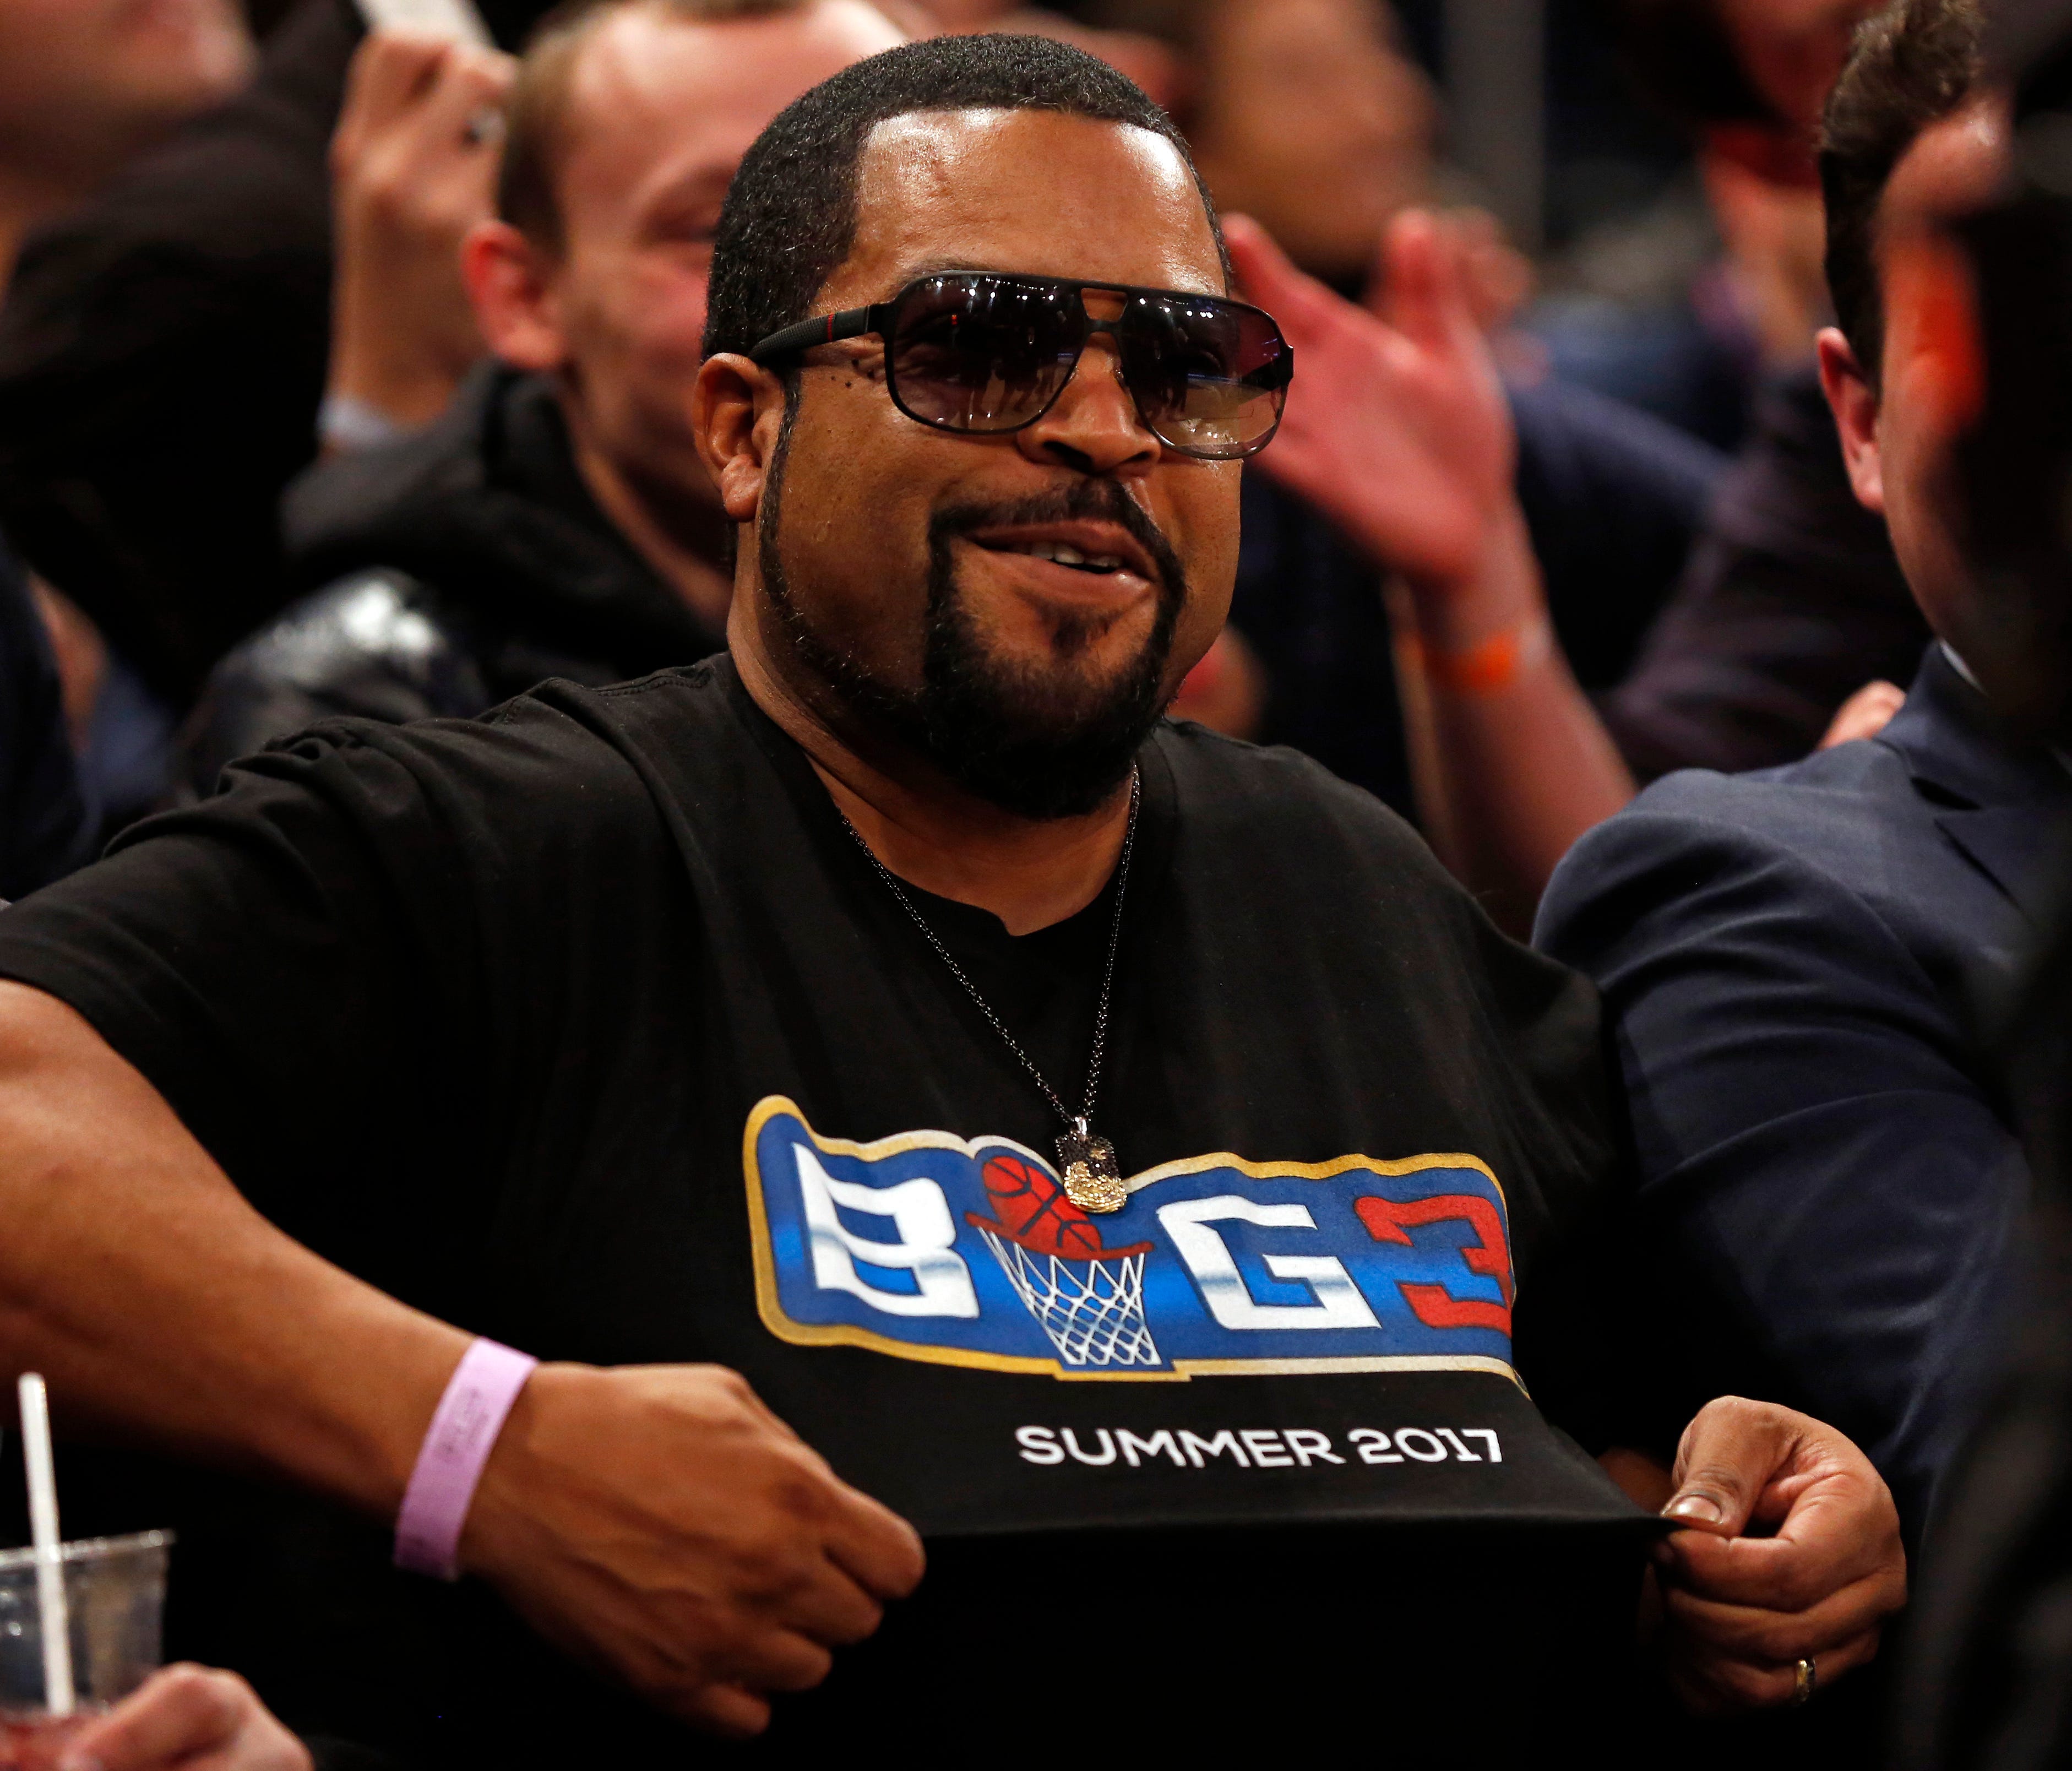 Actor and rapper Ice Cube attends the New York Knicks against the Indiana Pacers at Madison Square Garden.